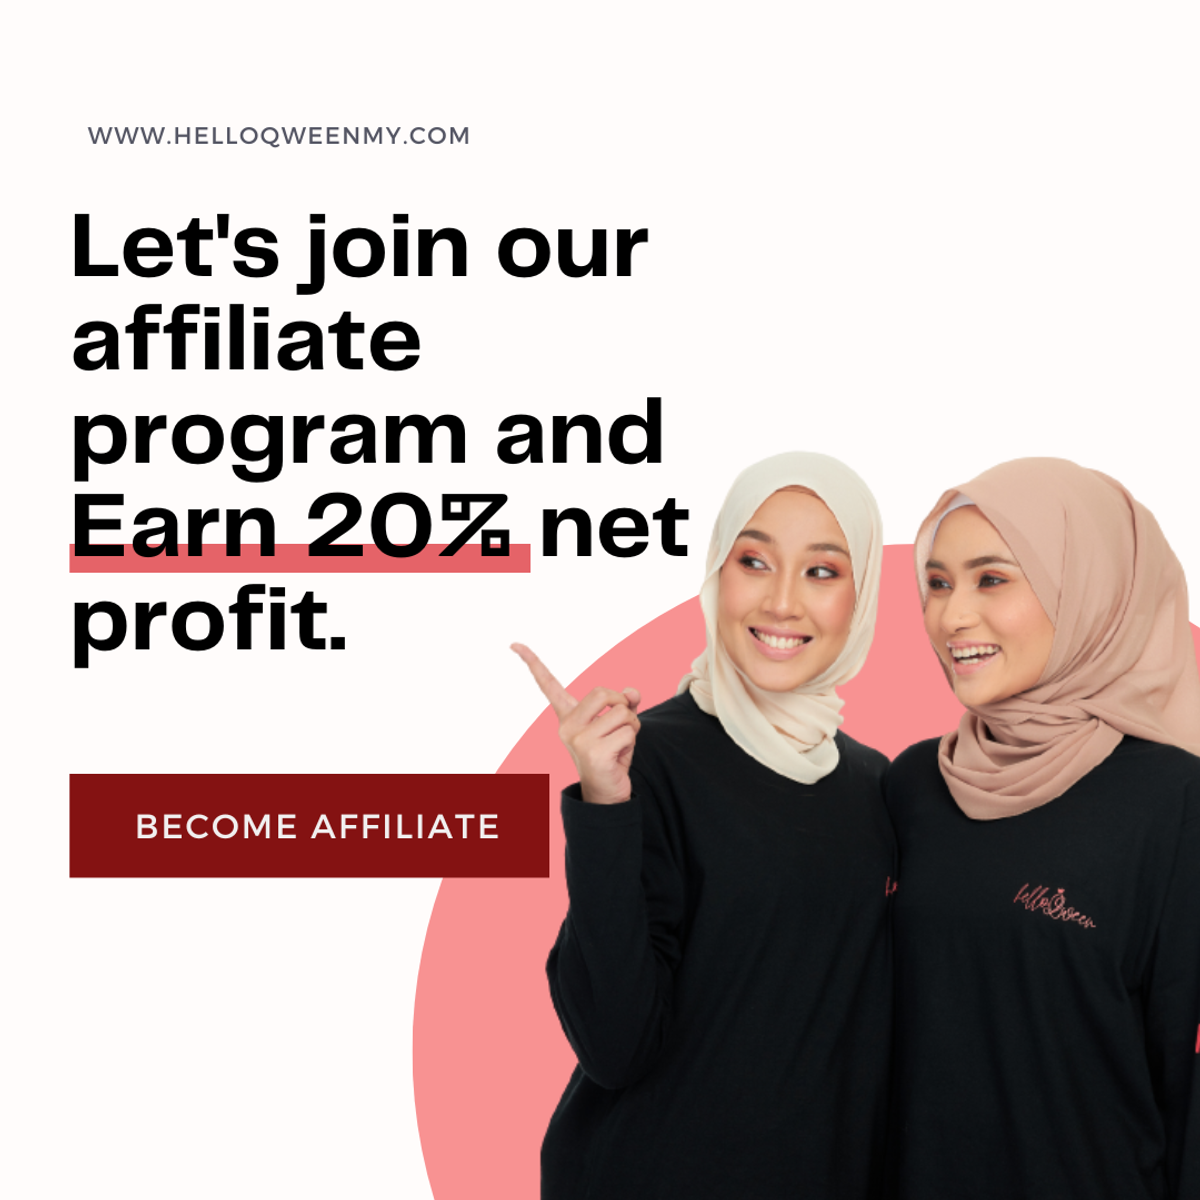 Affiliate Program with Hello Qween!